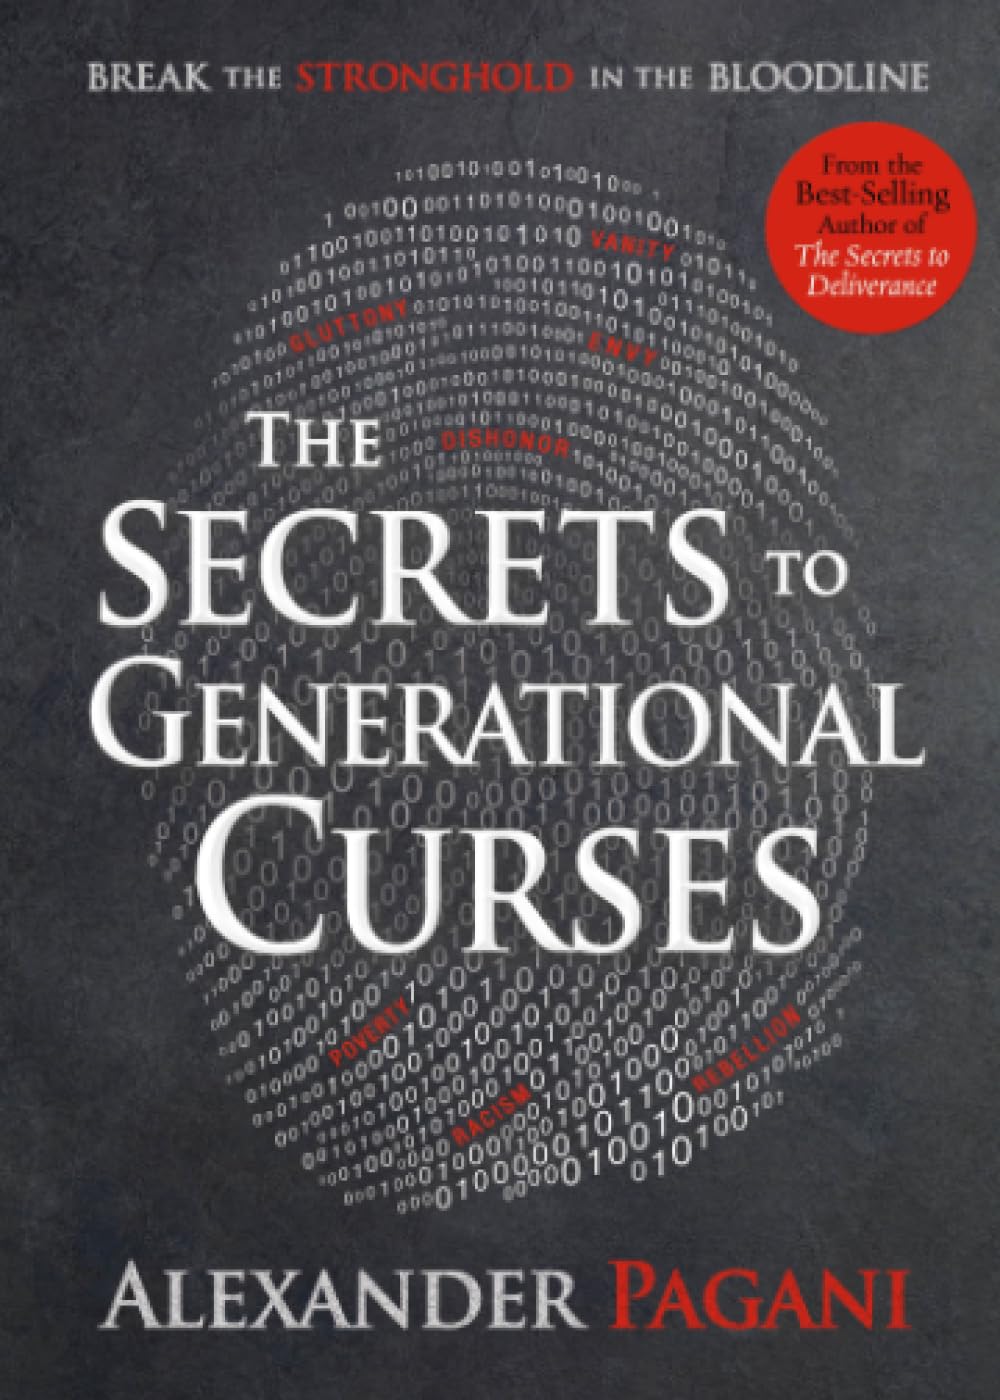 The Secrets to Generational Curses Break the Stronghold in the Bloodline - SureShot Books Publishing LLC